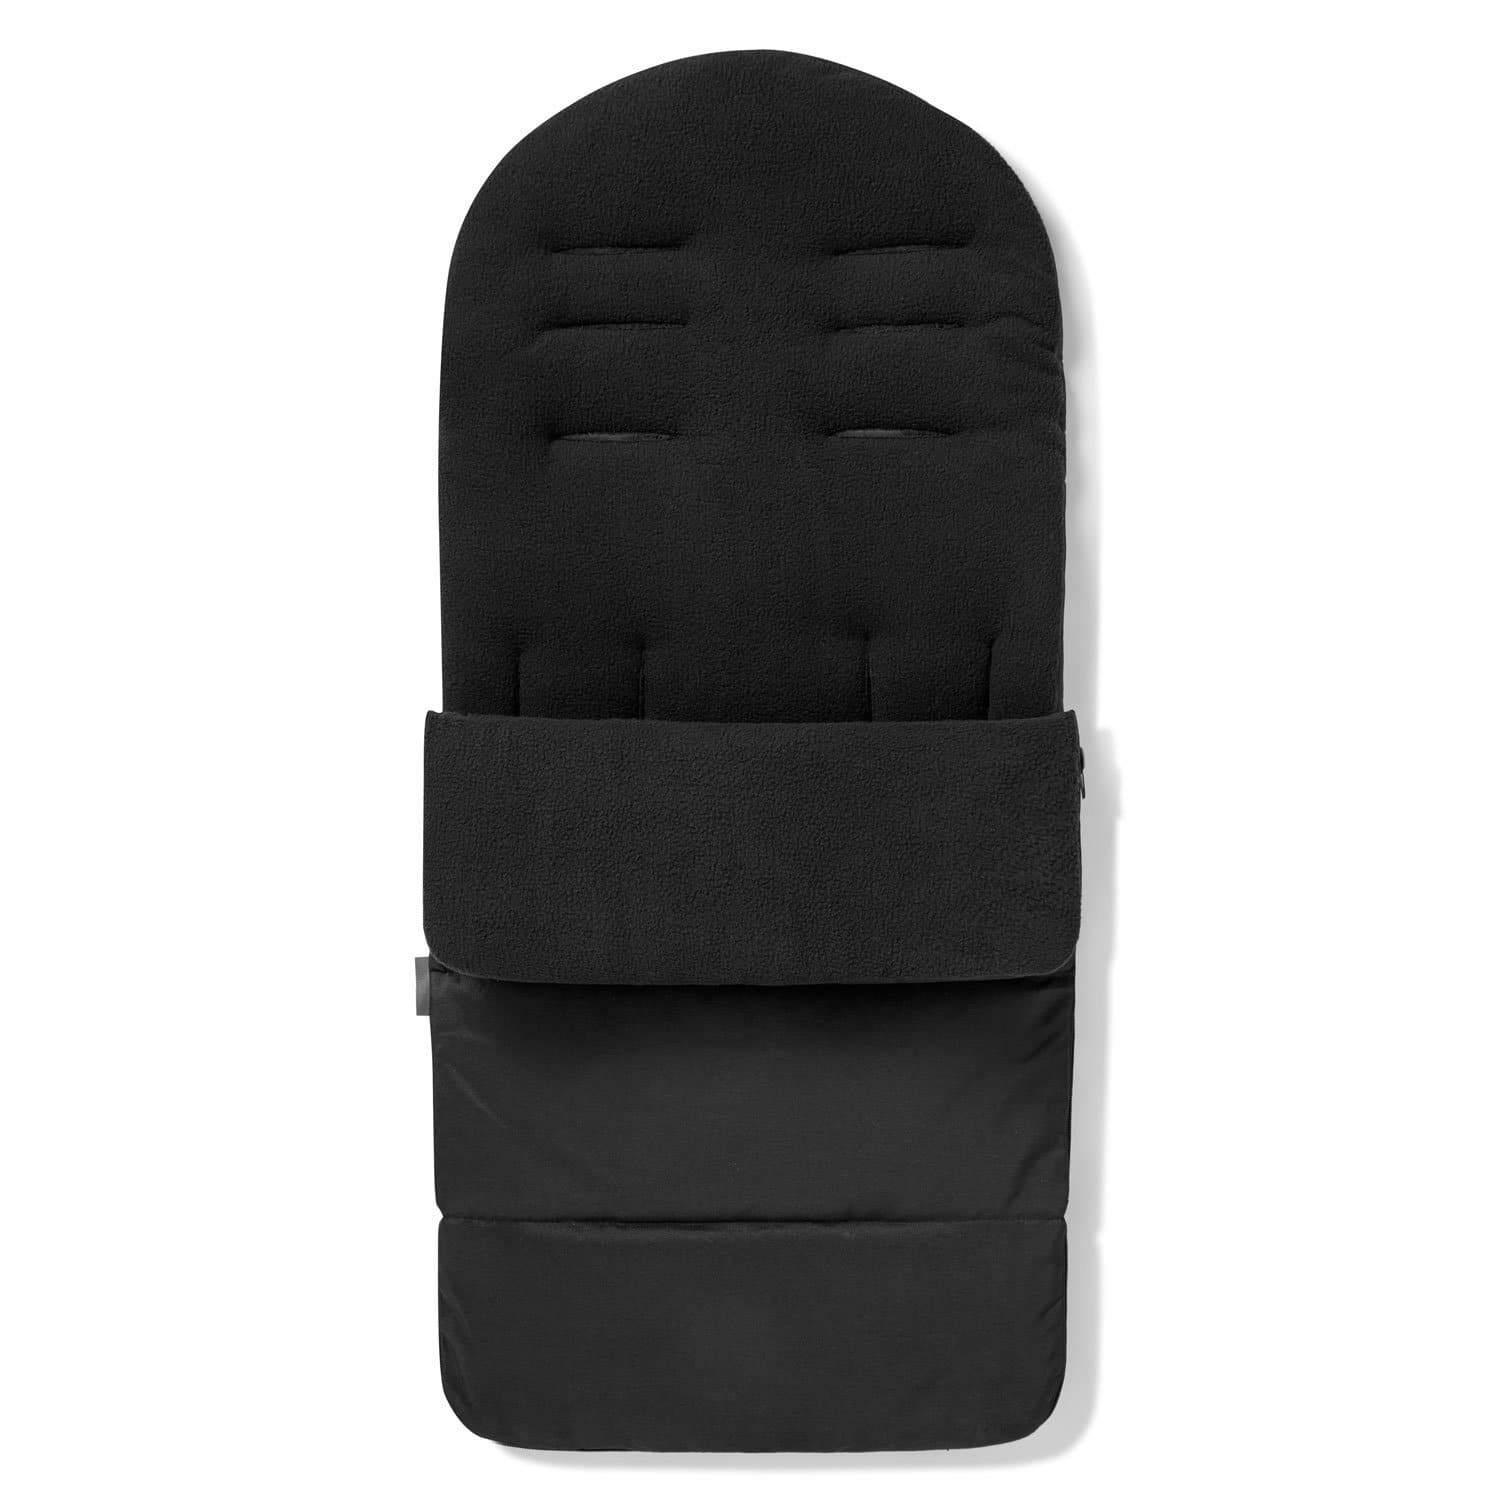 Premium Footmuff / Cosy Toes Compatible with Ickle Bubba - Black Jack / Fits All Models | For Your Little One